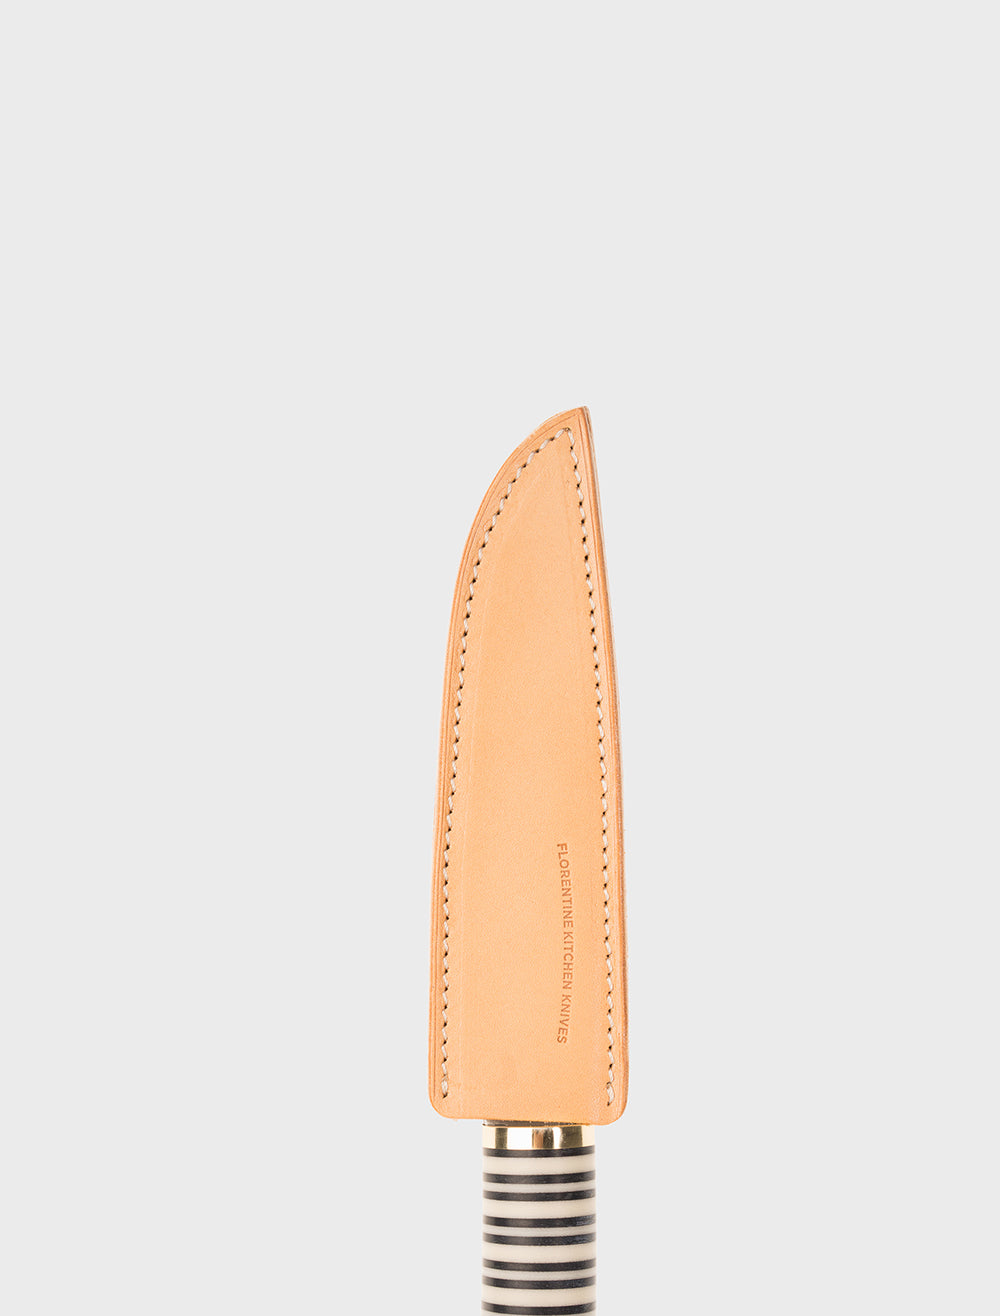 LEATHER BLADE GUARD FOR FLORENTINE PARING KNIVES